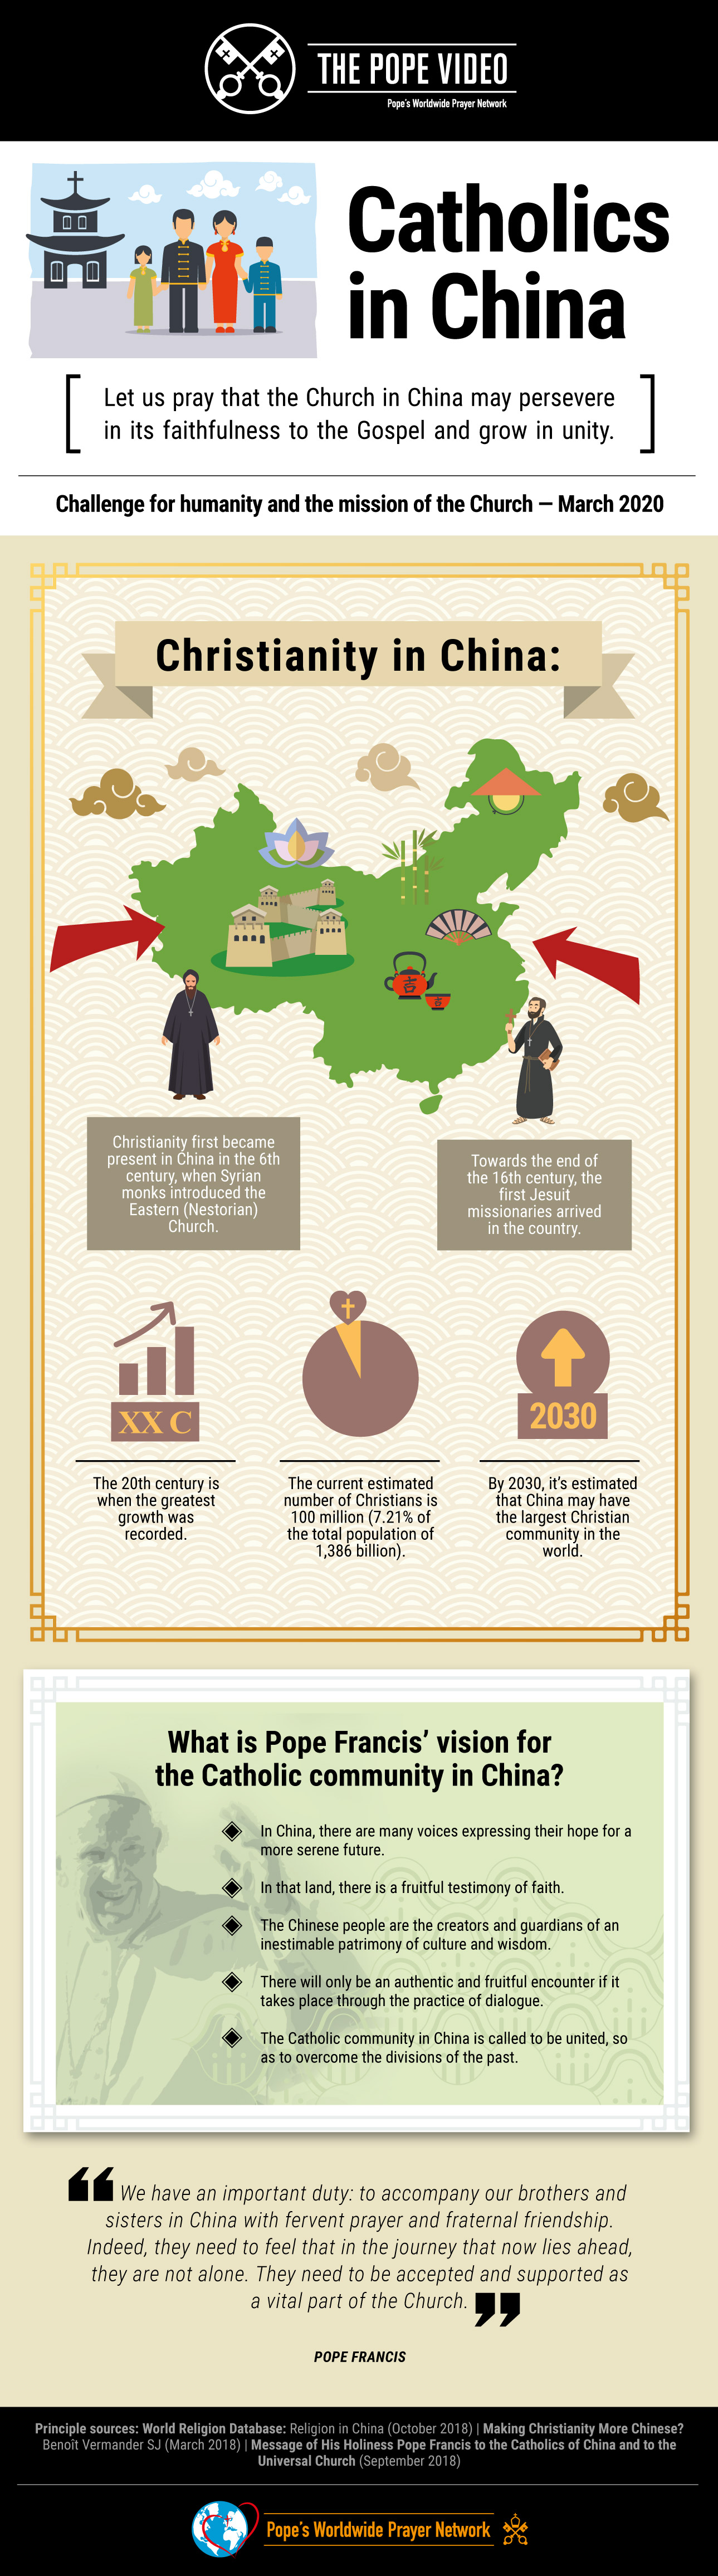 infographic-tpv-3-2020-en-the-pope-video-catholics-in-china.jpg